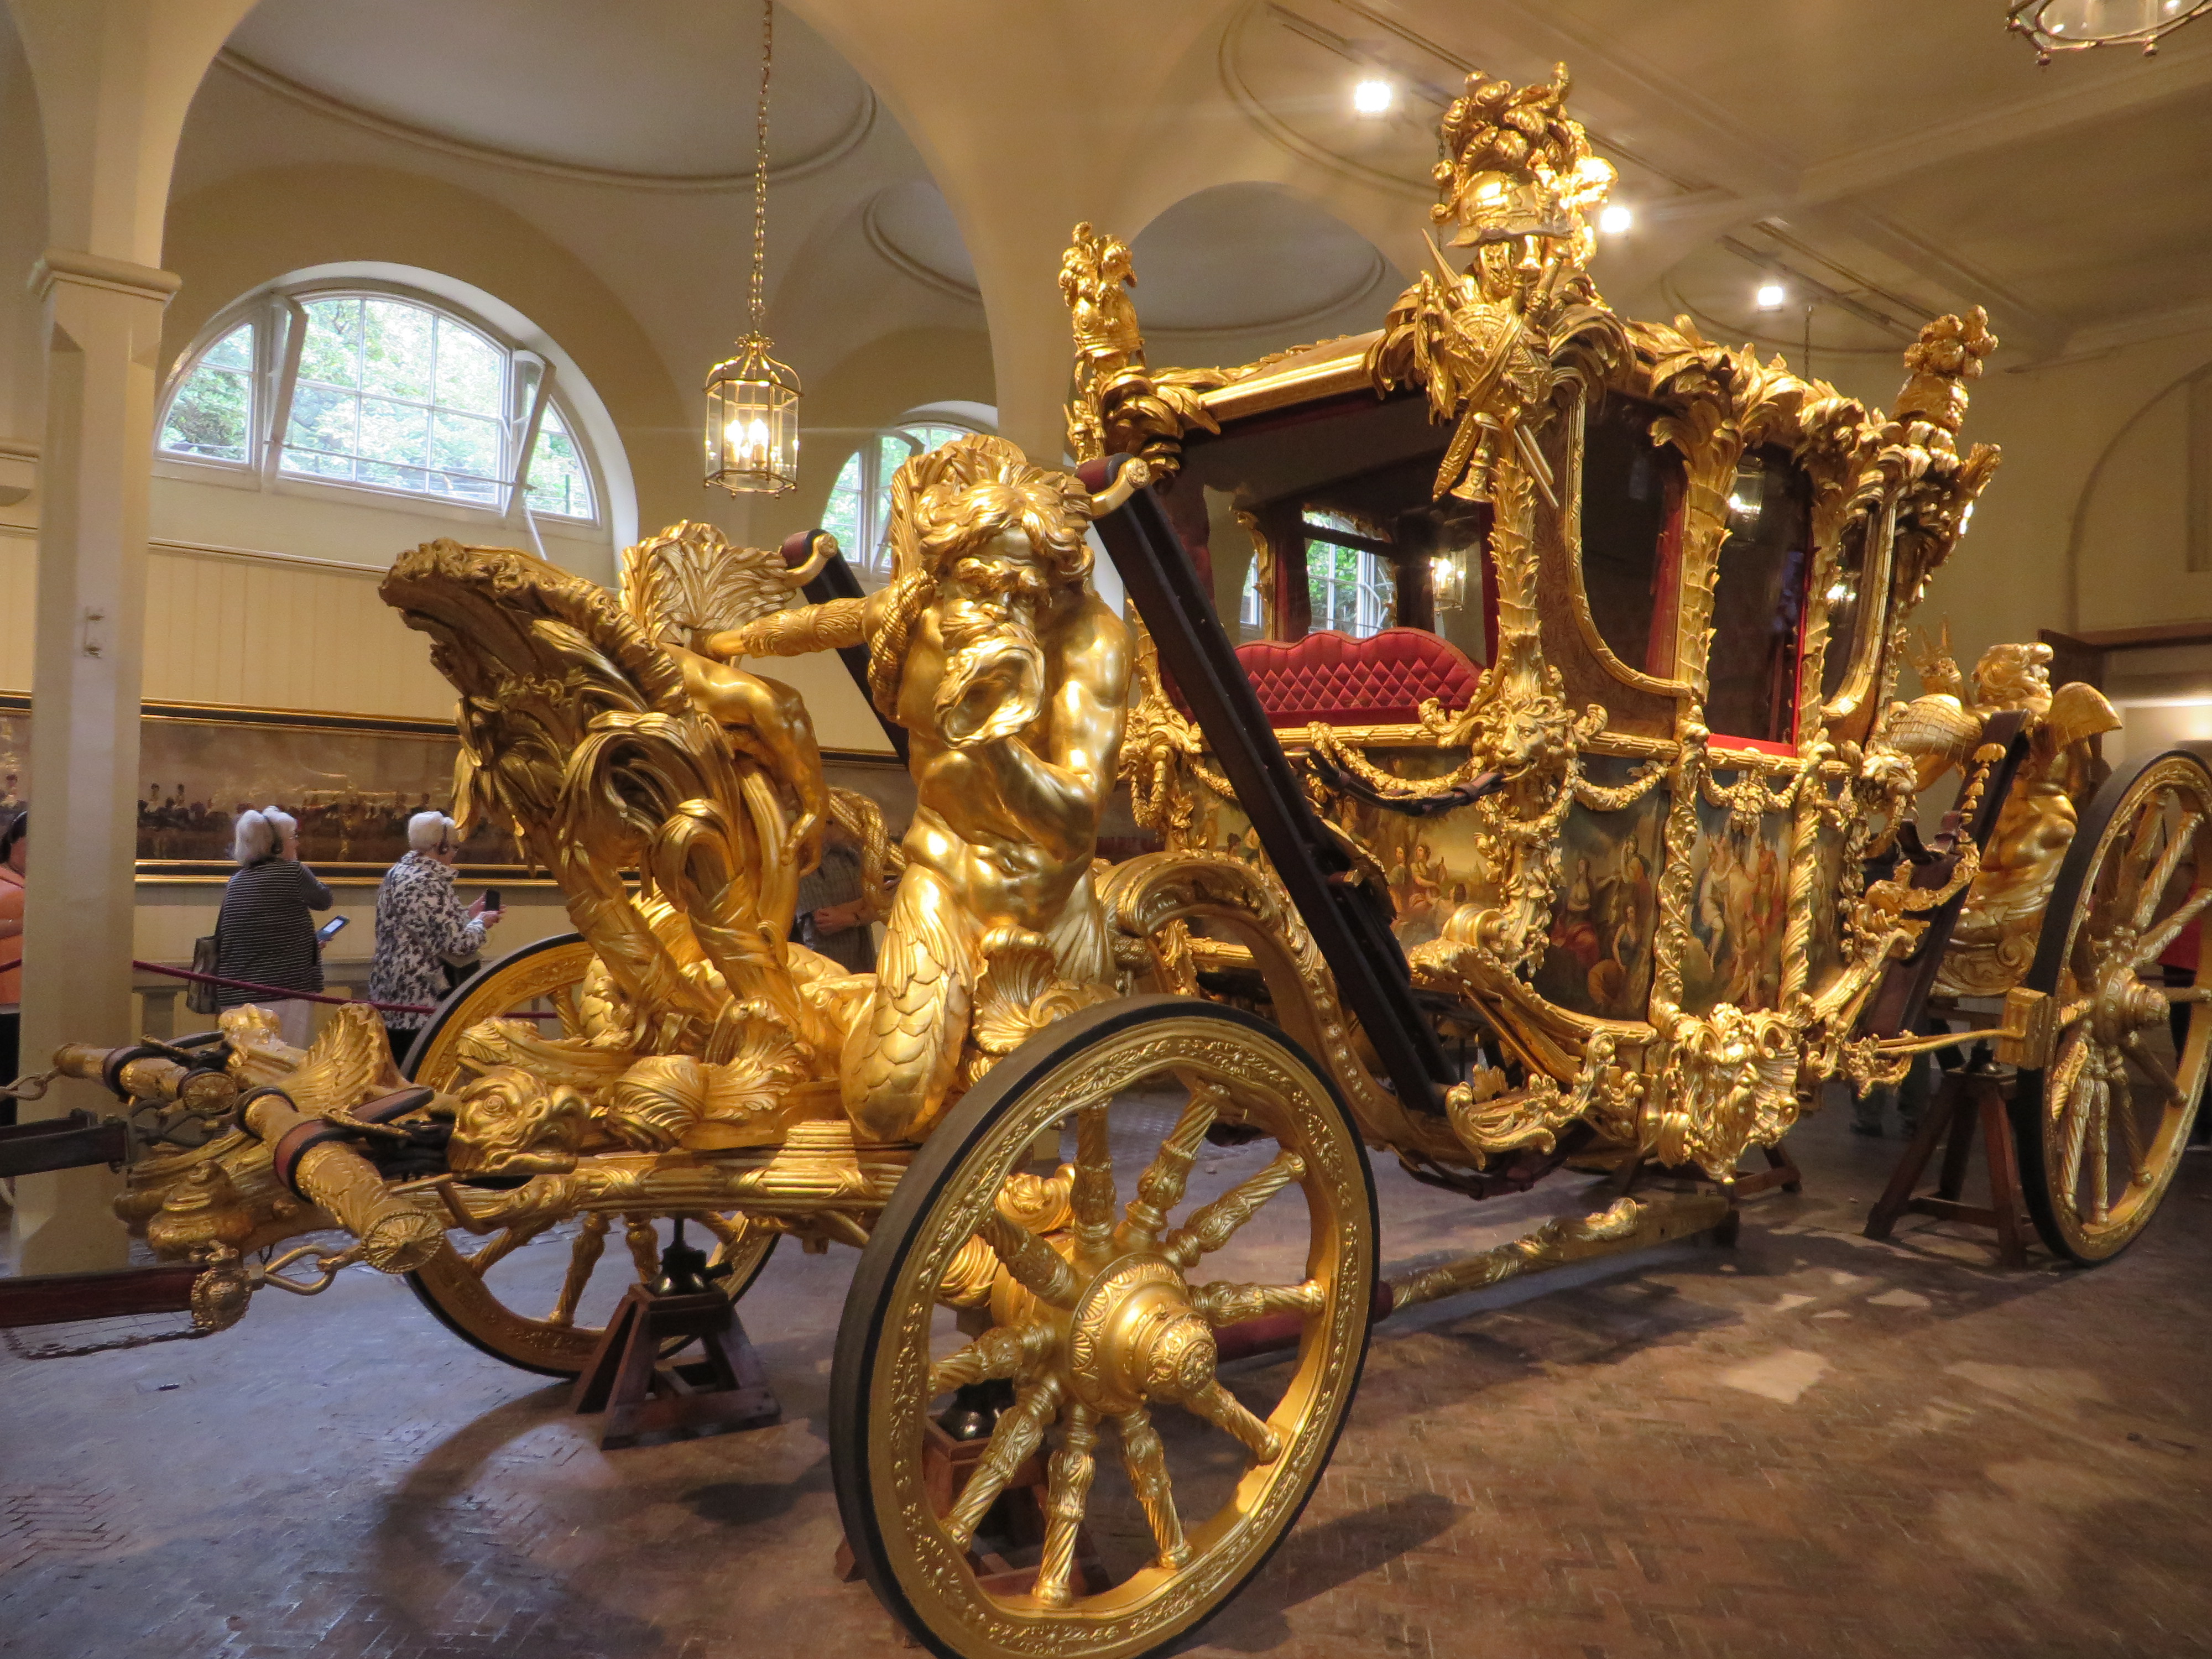 Buckingham Palace State Rooms and Royal Mews